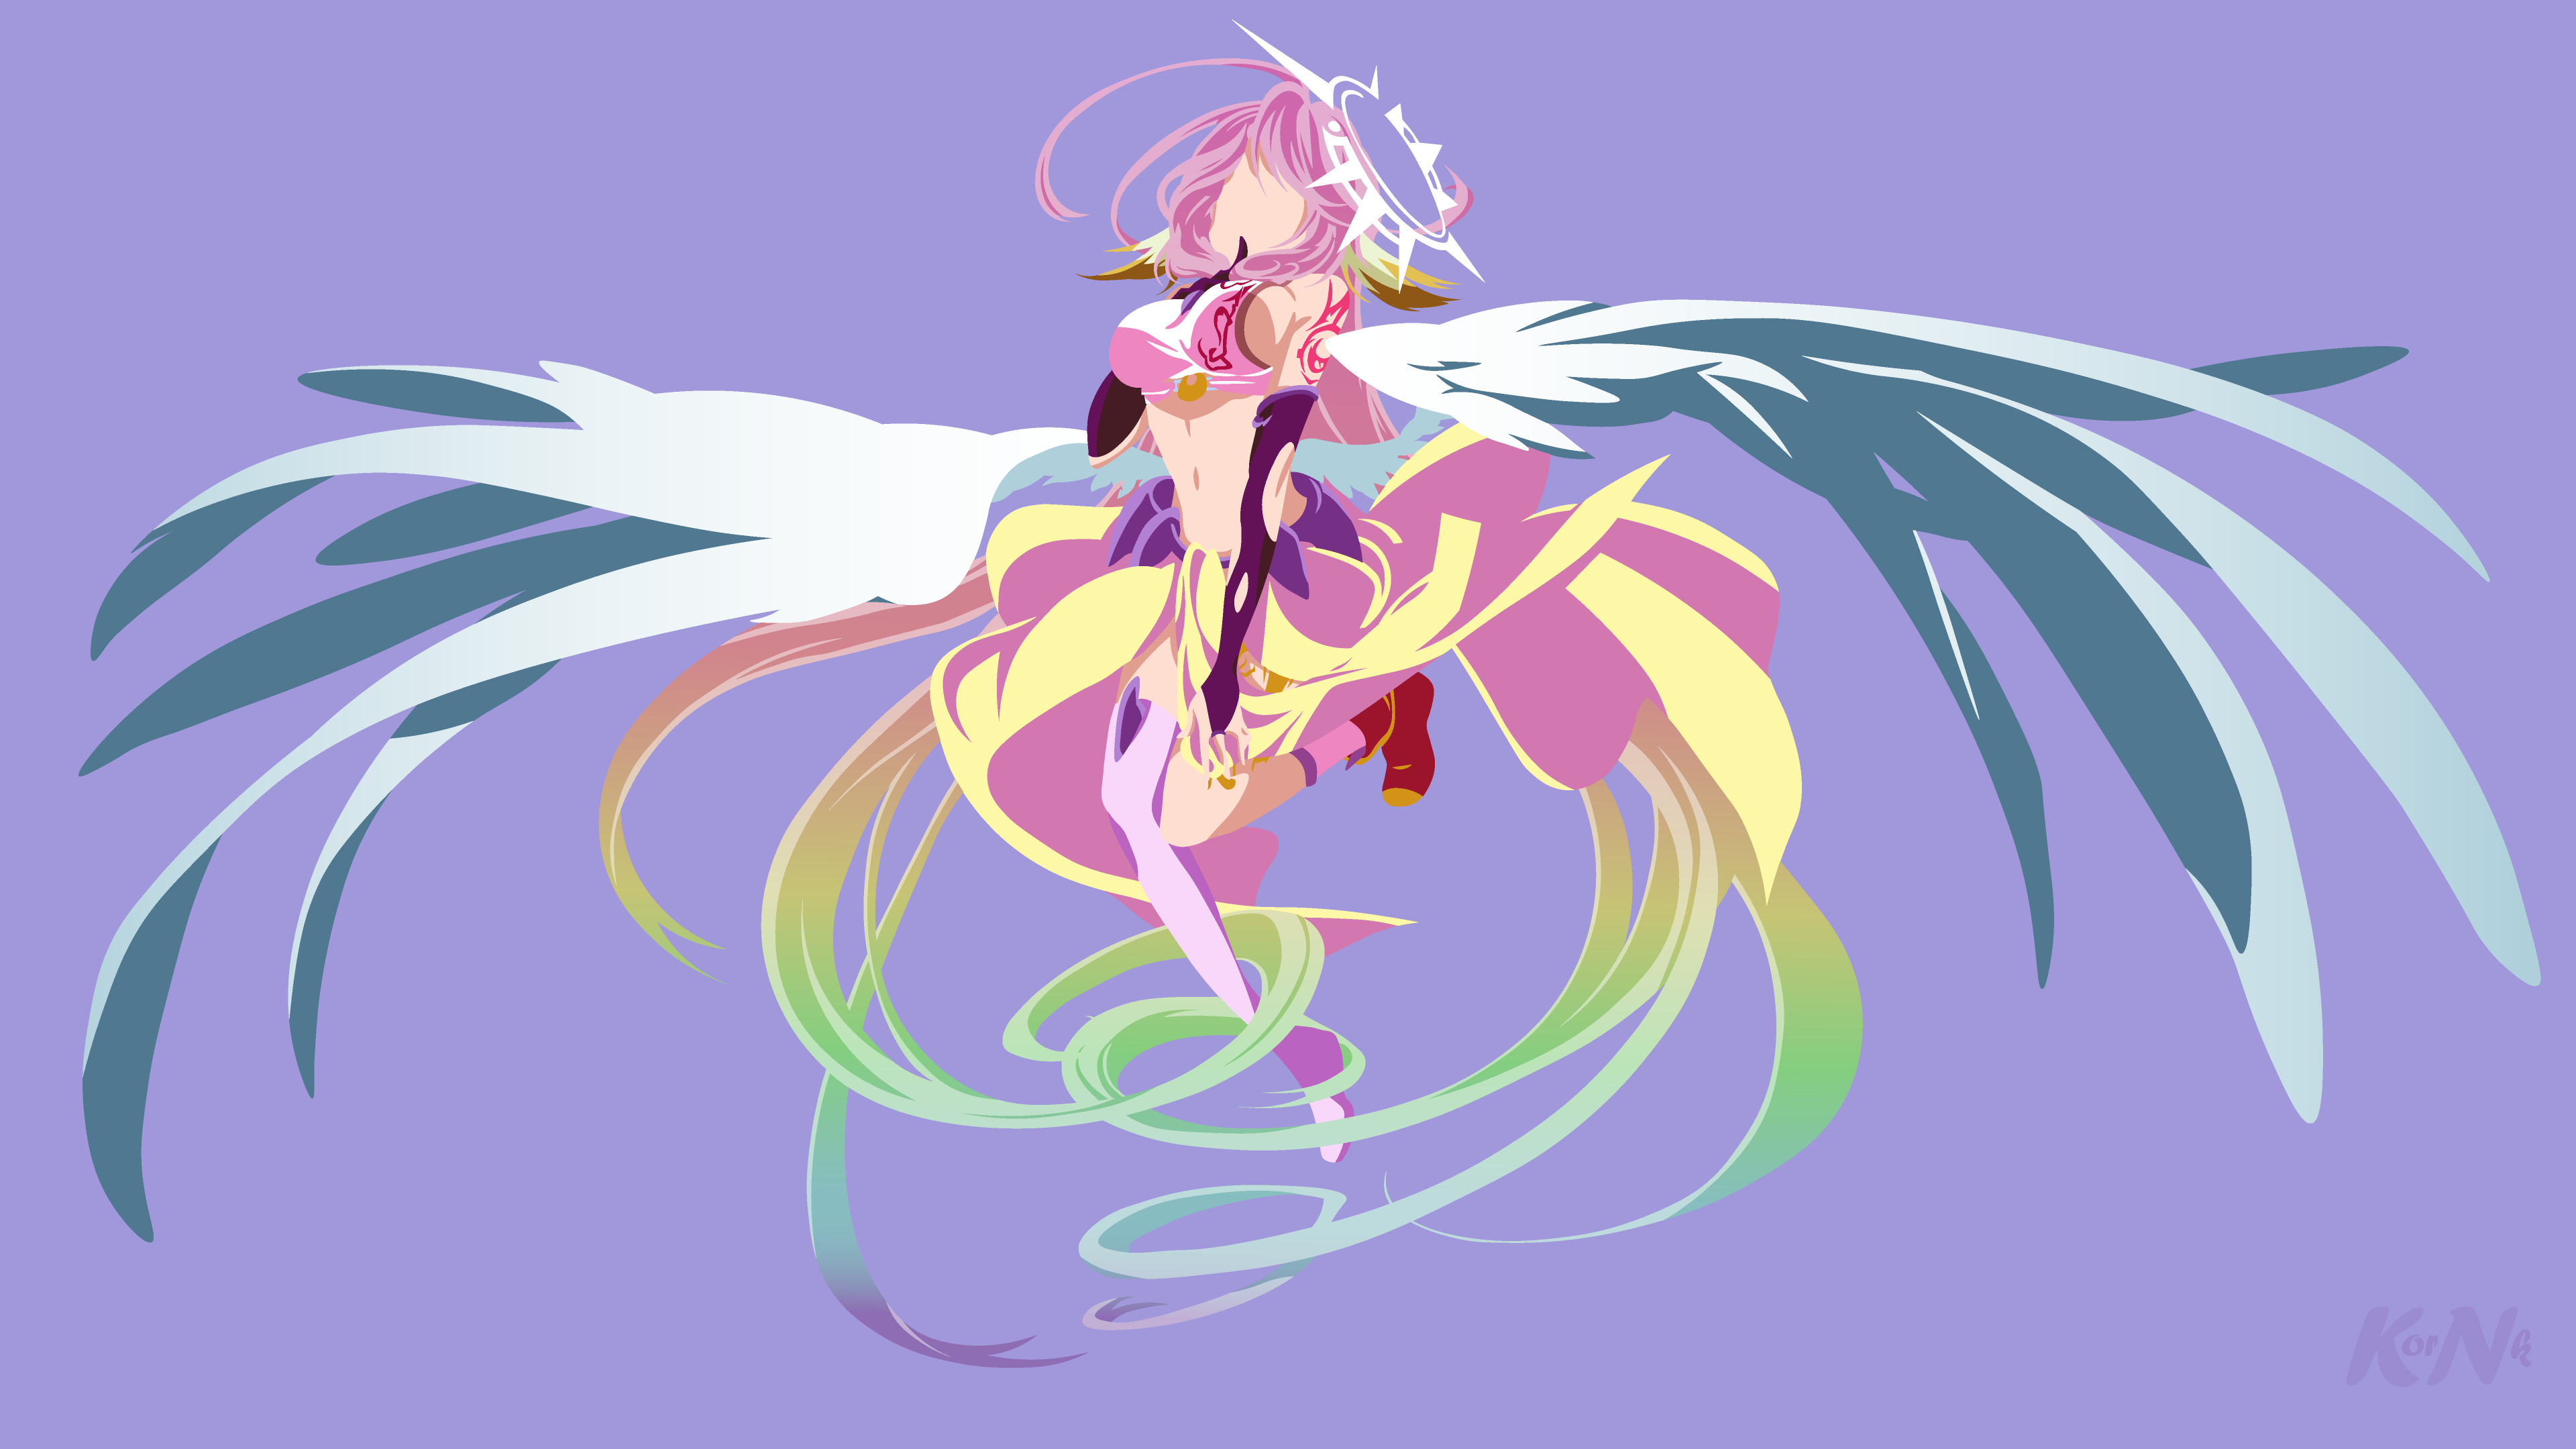 jibril-no-game-no-life-by-thekornk-on-deviantart